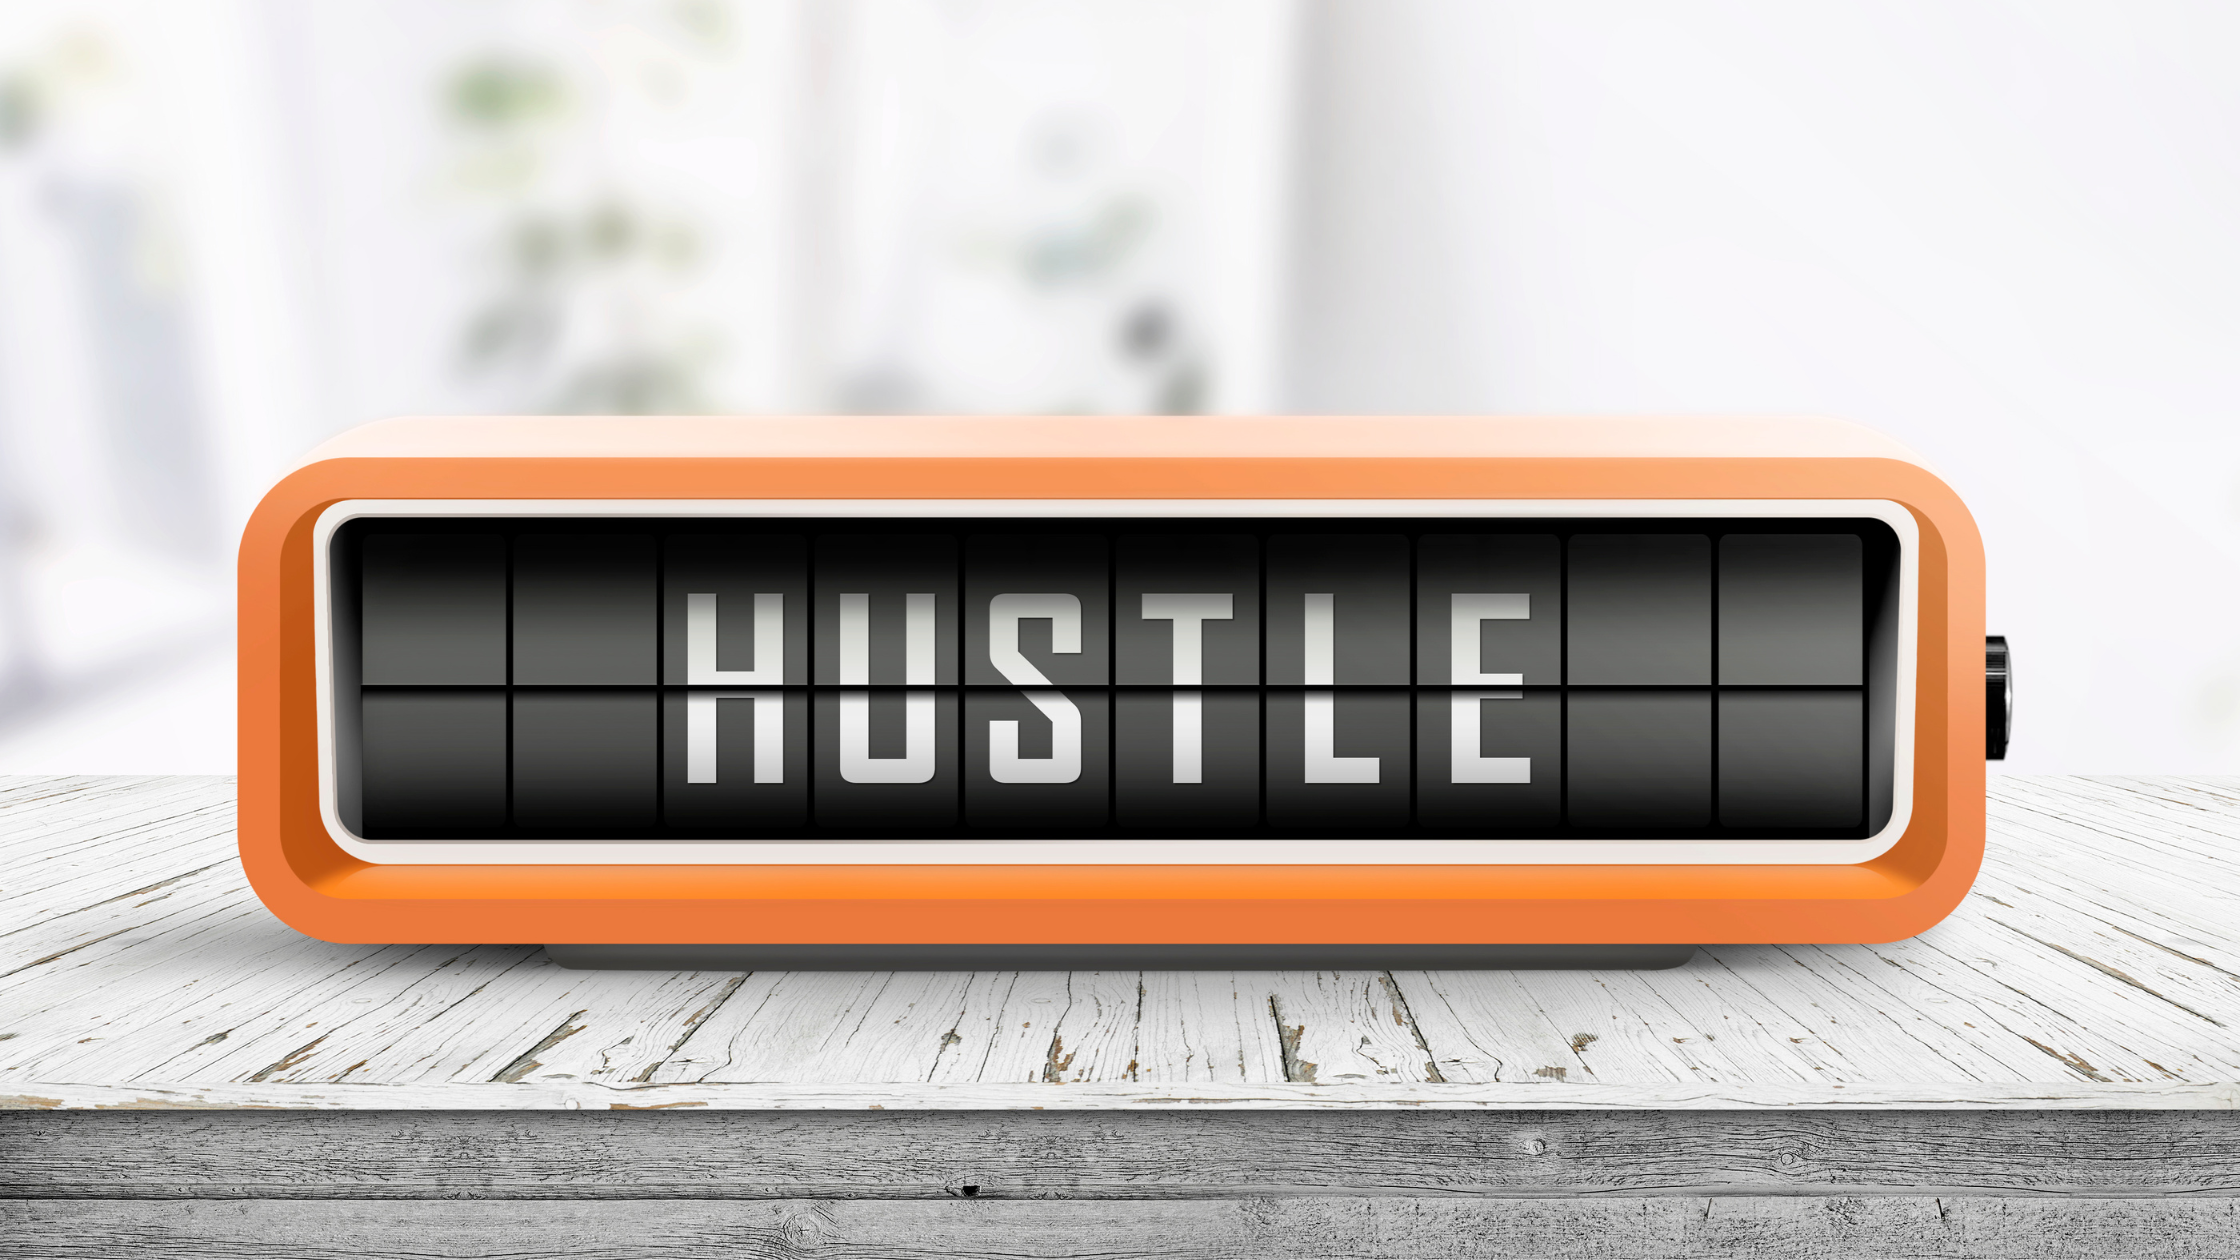 Wanting To Start Your Side Hustle? You Need To Know This …